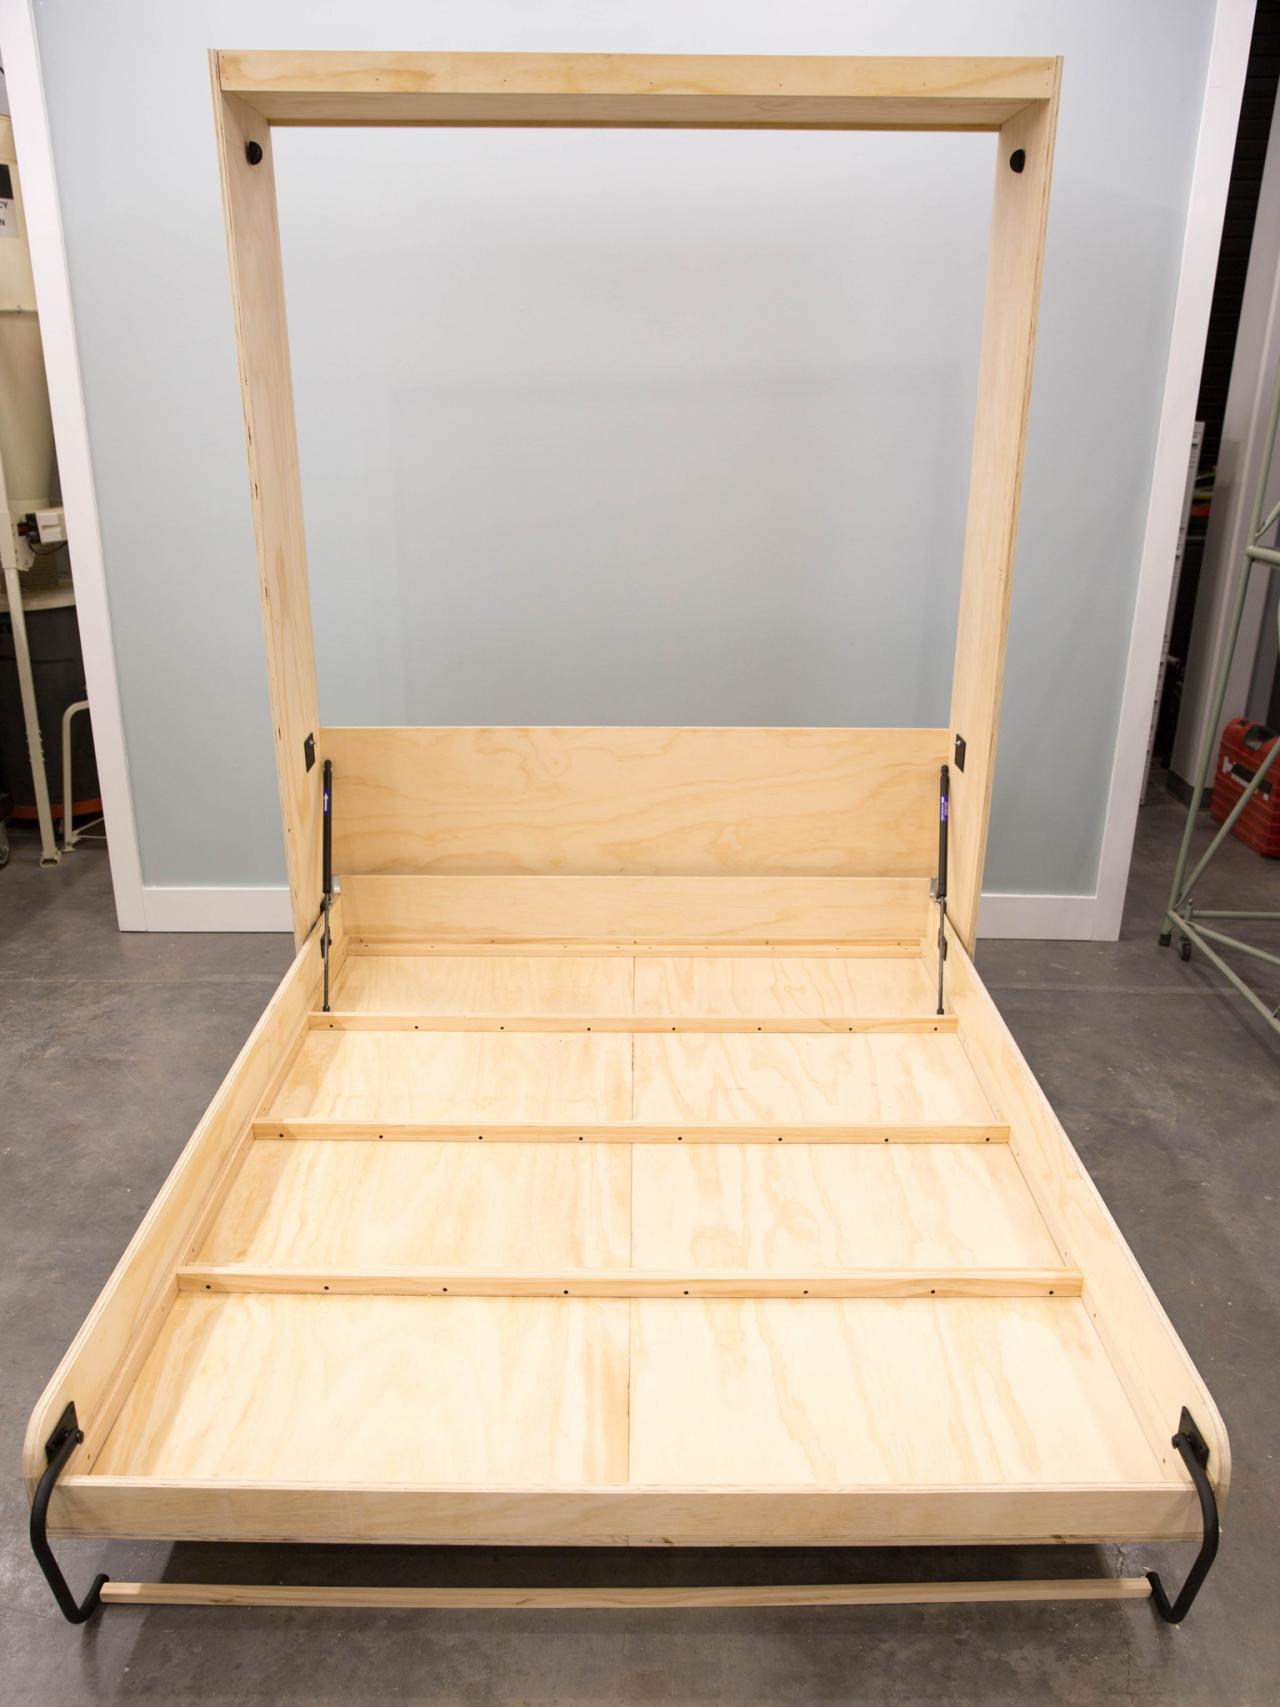 How To Build A Murphy Bed, How To Build A Bed Attached The Wall